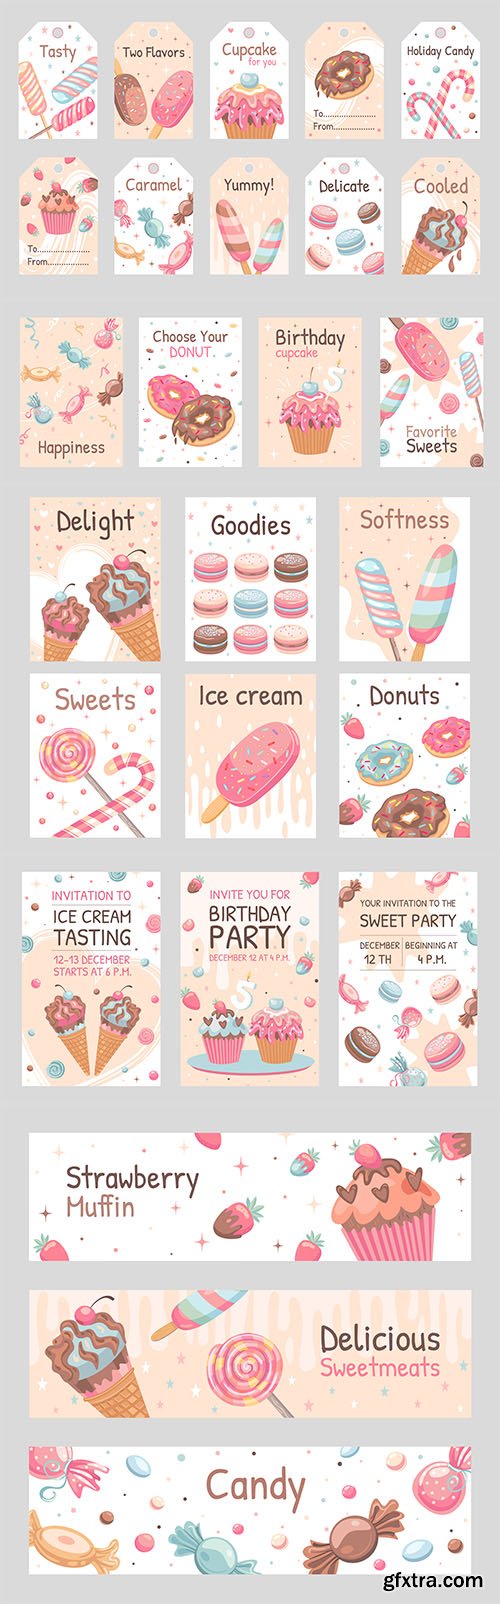 Sweets posters set of candies, donuts, ice cream, cupcake illustrations